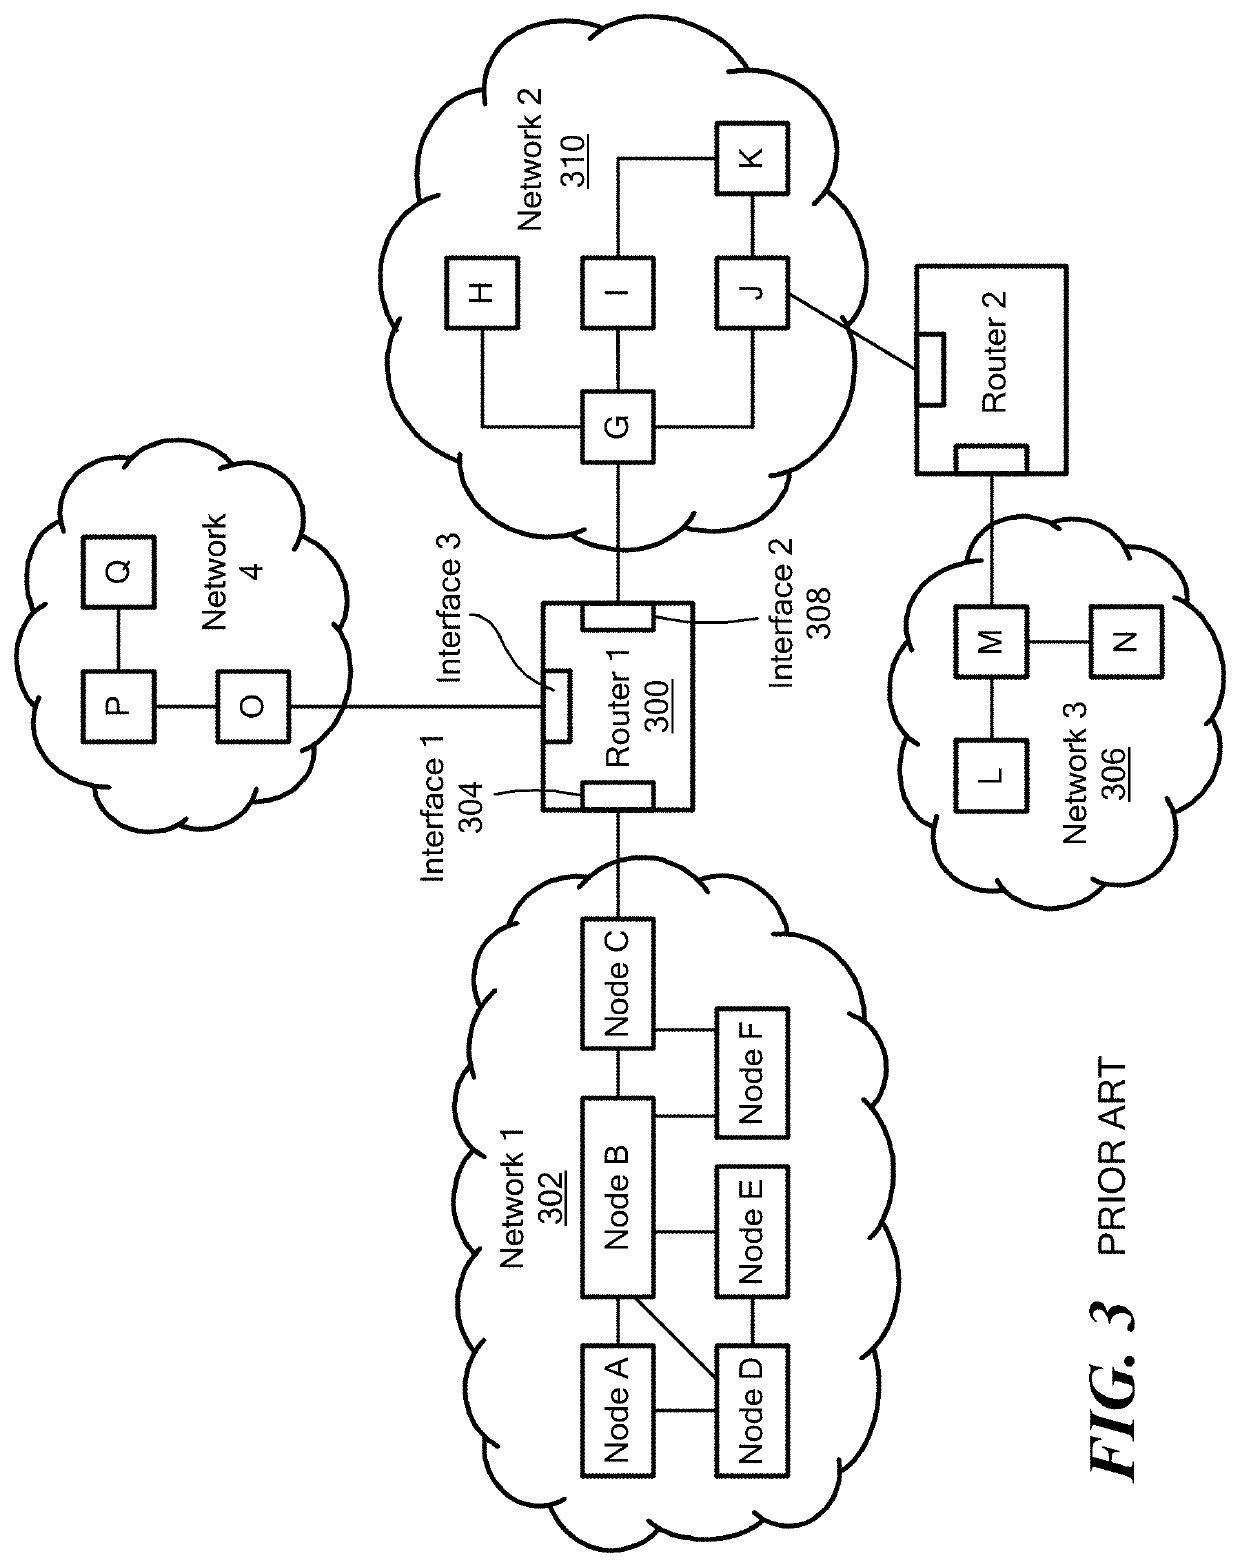 Network neighborhoods for establishing communication relationships between communication interfaces in an administrative domain